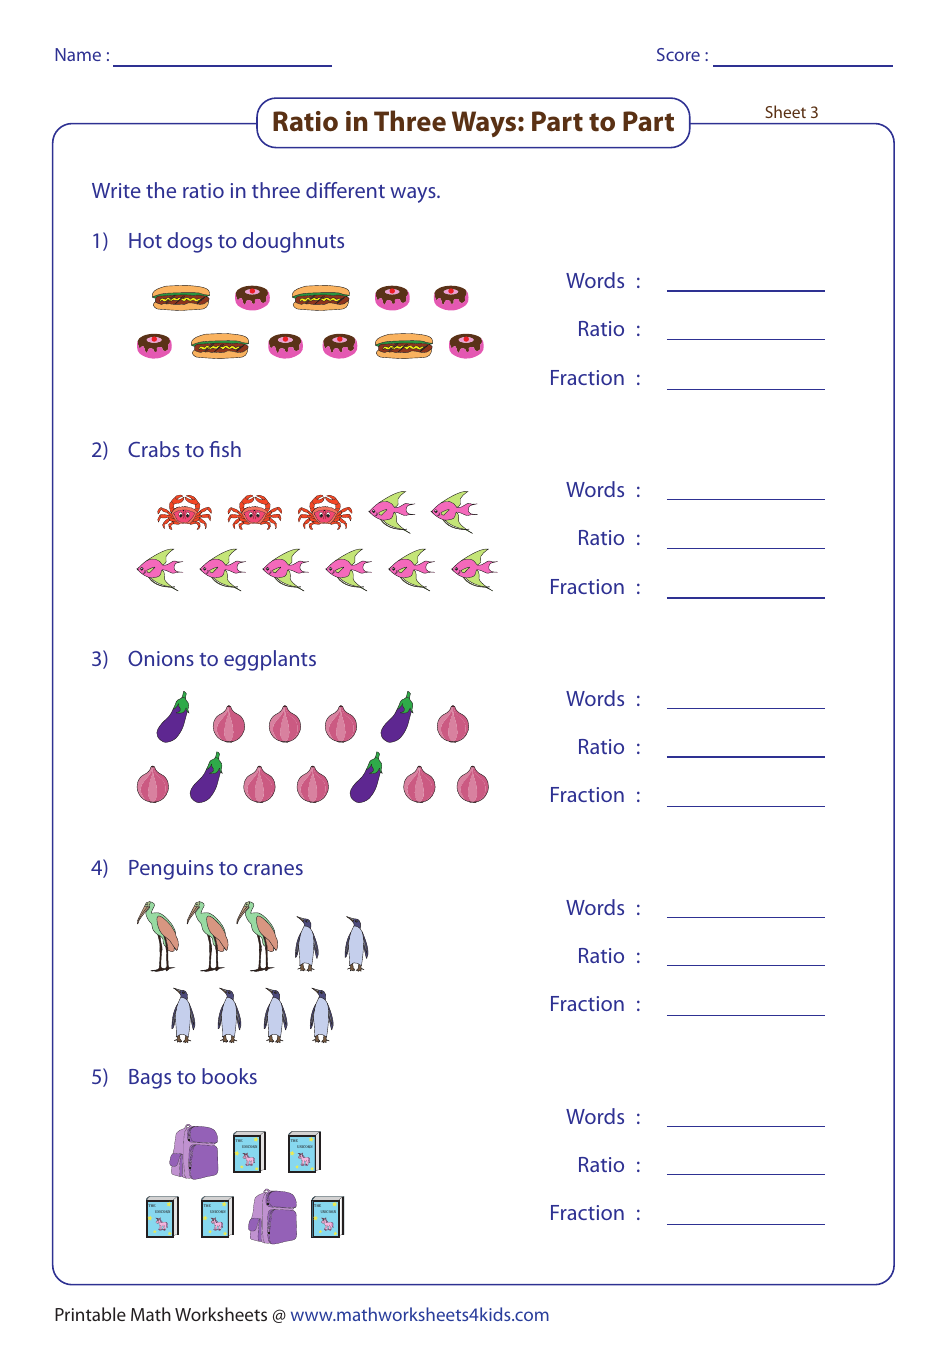 writing-ratios-in-different-ways-worksheet-with-answer-key-download-printable-pdf-templateroller